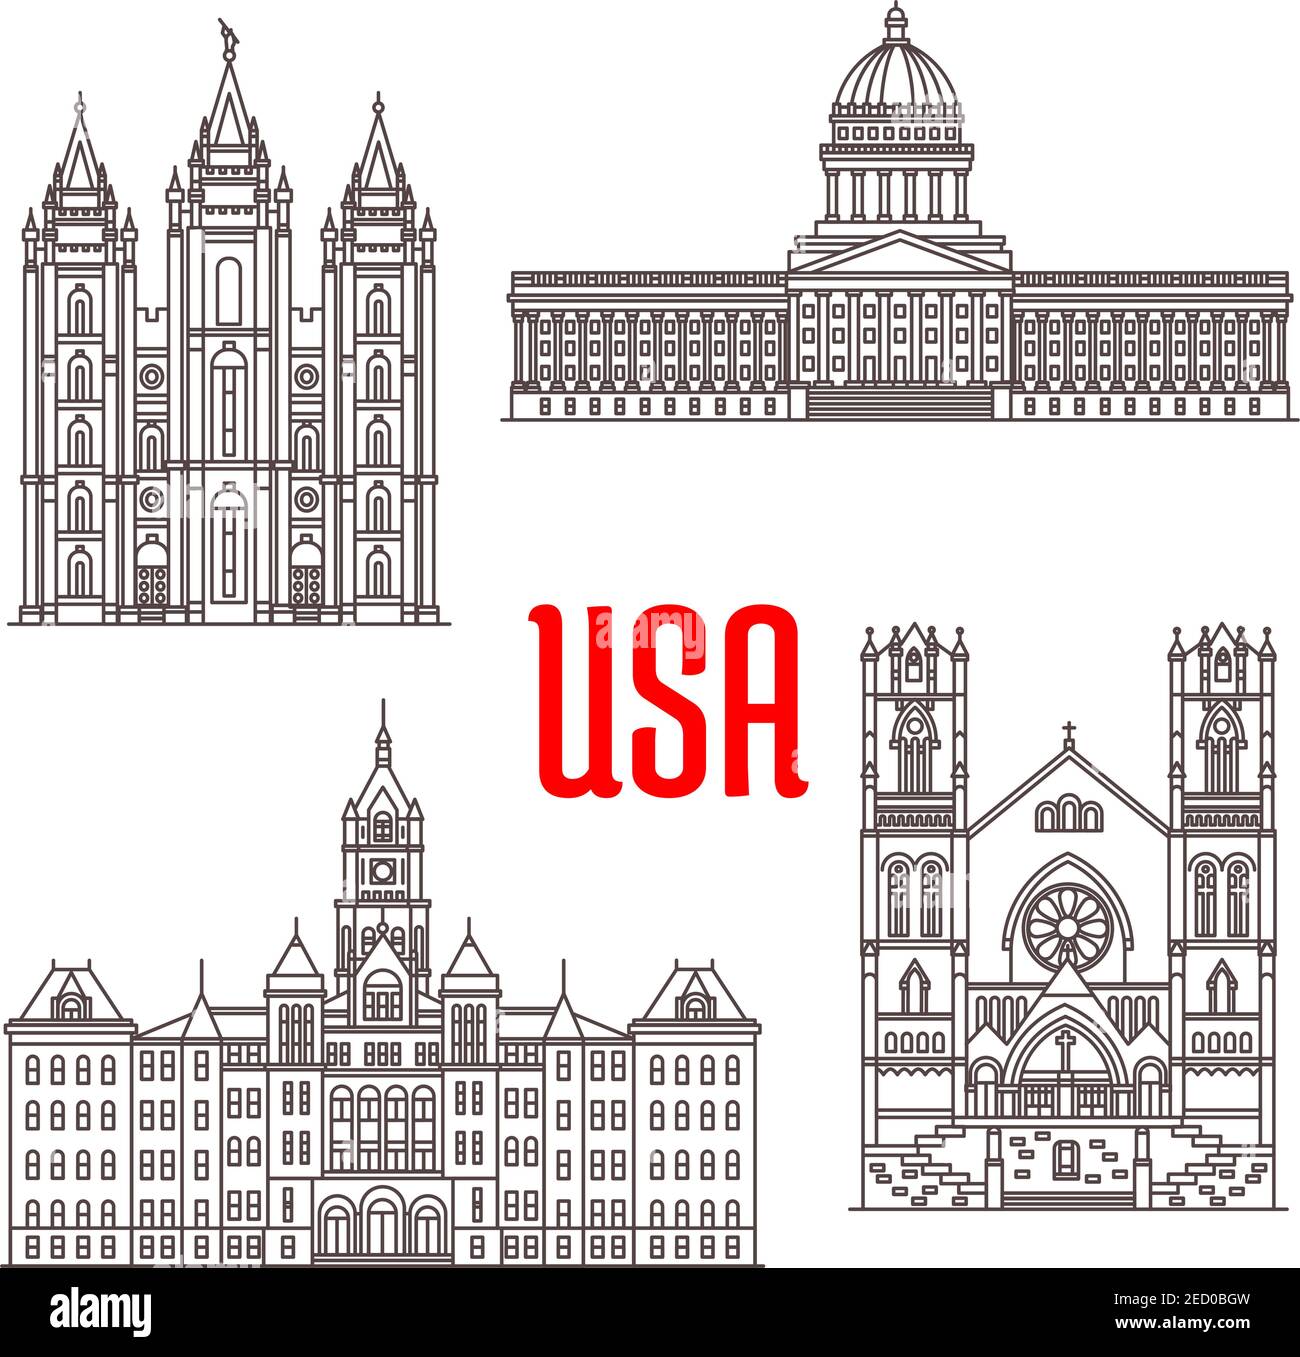 Famous buildings symbols and icons of US. Salt Lake Temple, Utah State Capitol, Salt Lake City and County Building, Cathedral of the Madeleine. Americ Stock Vector